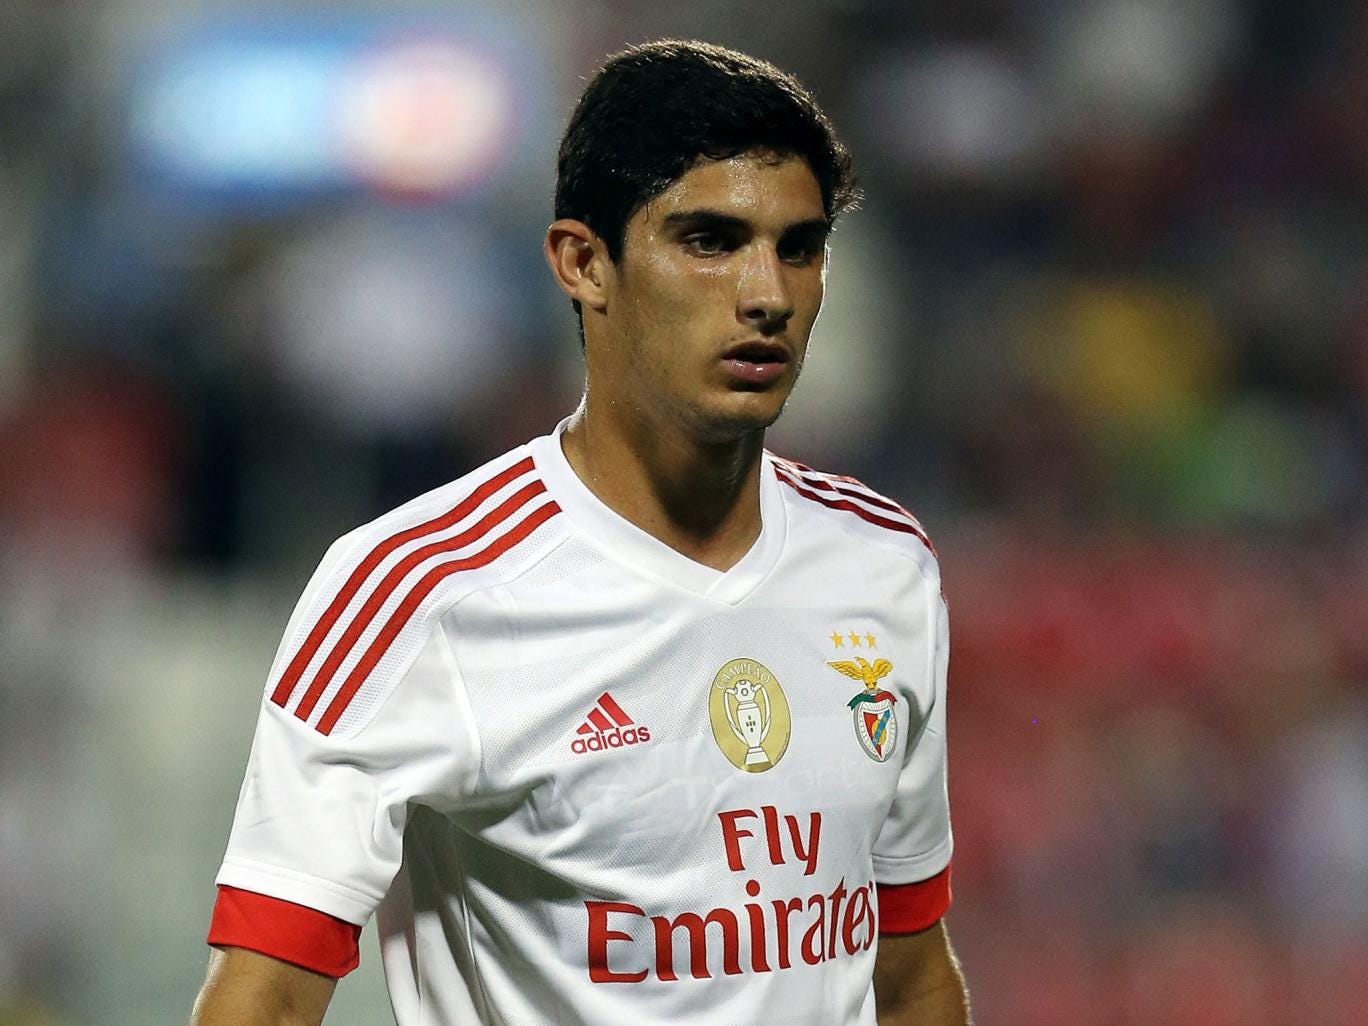 goncalo guedes - photo #6